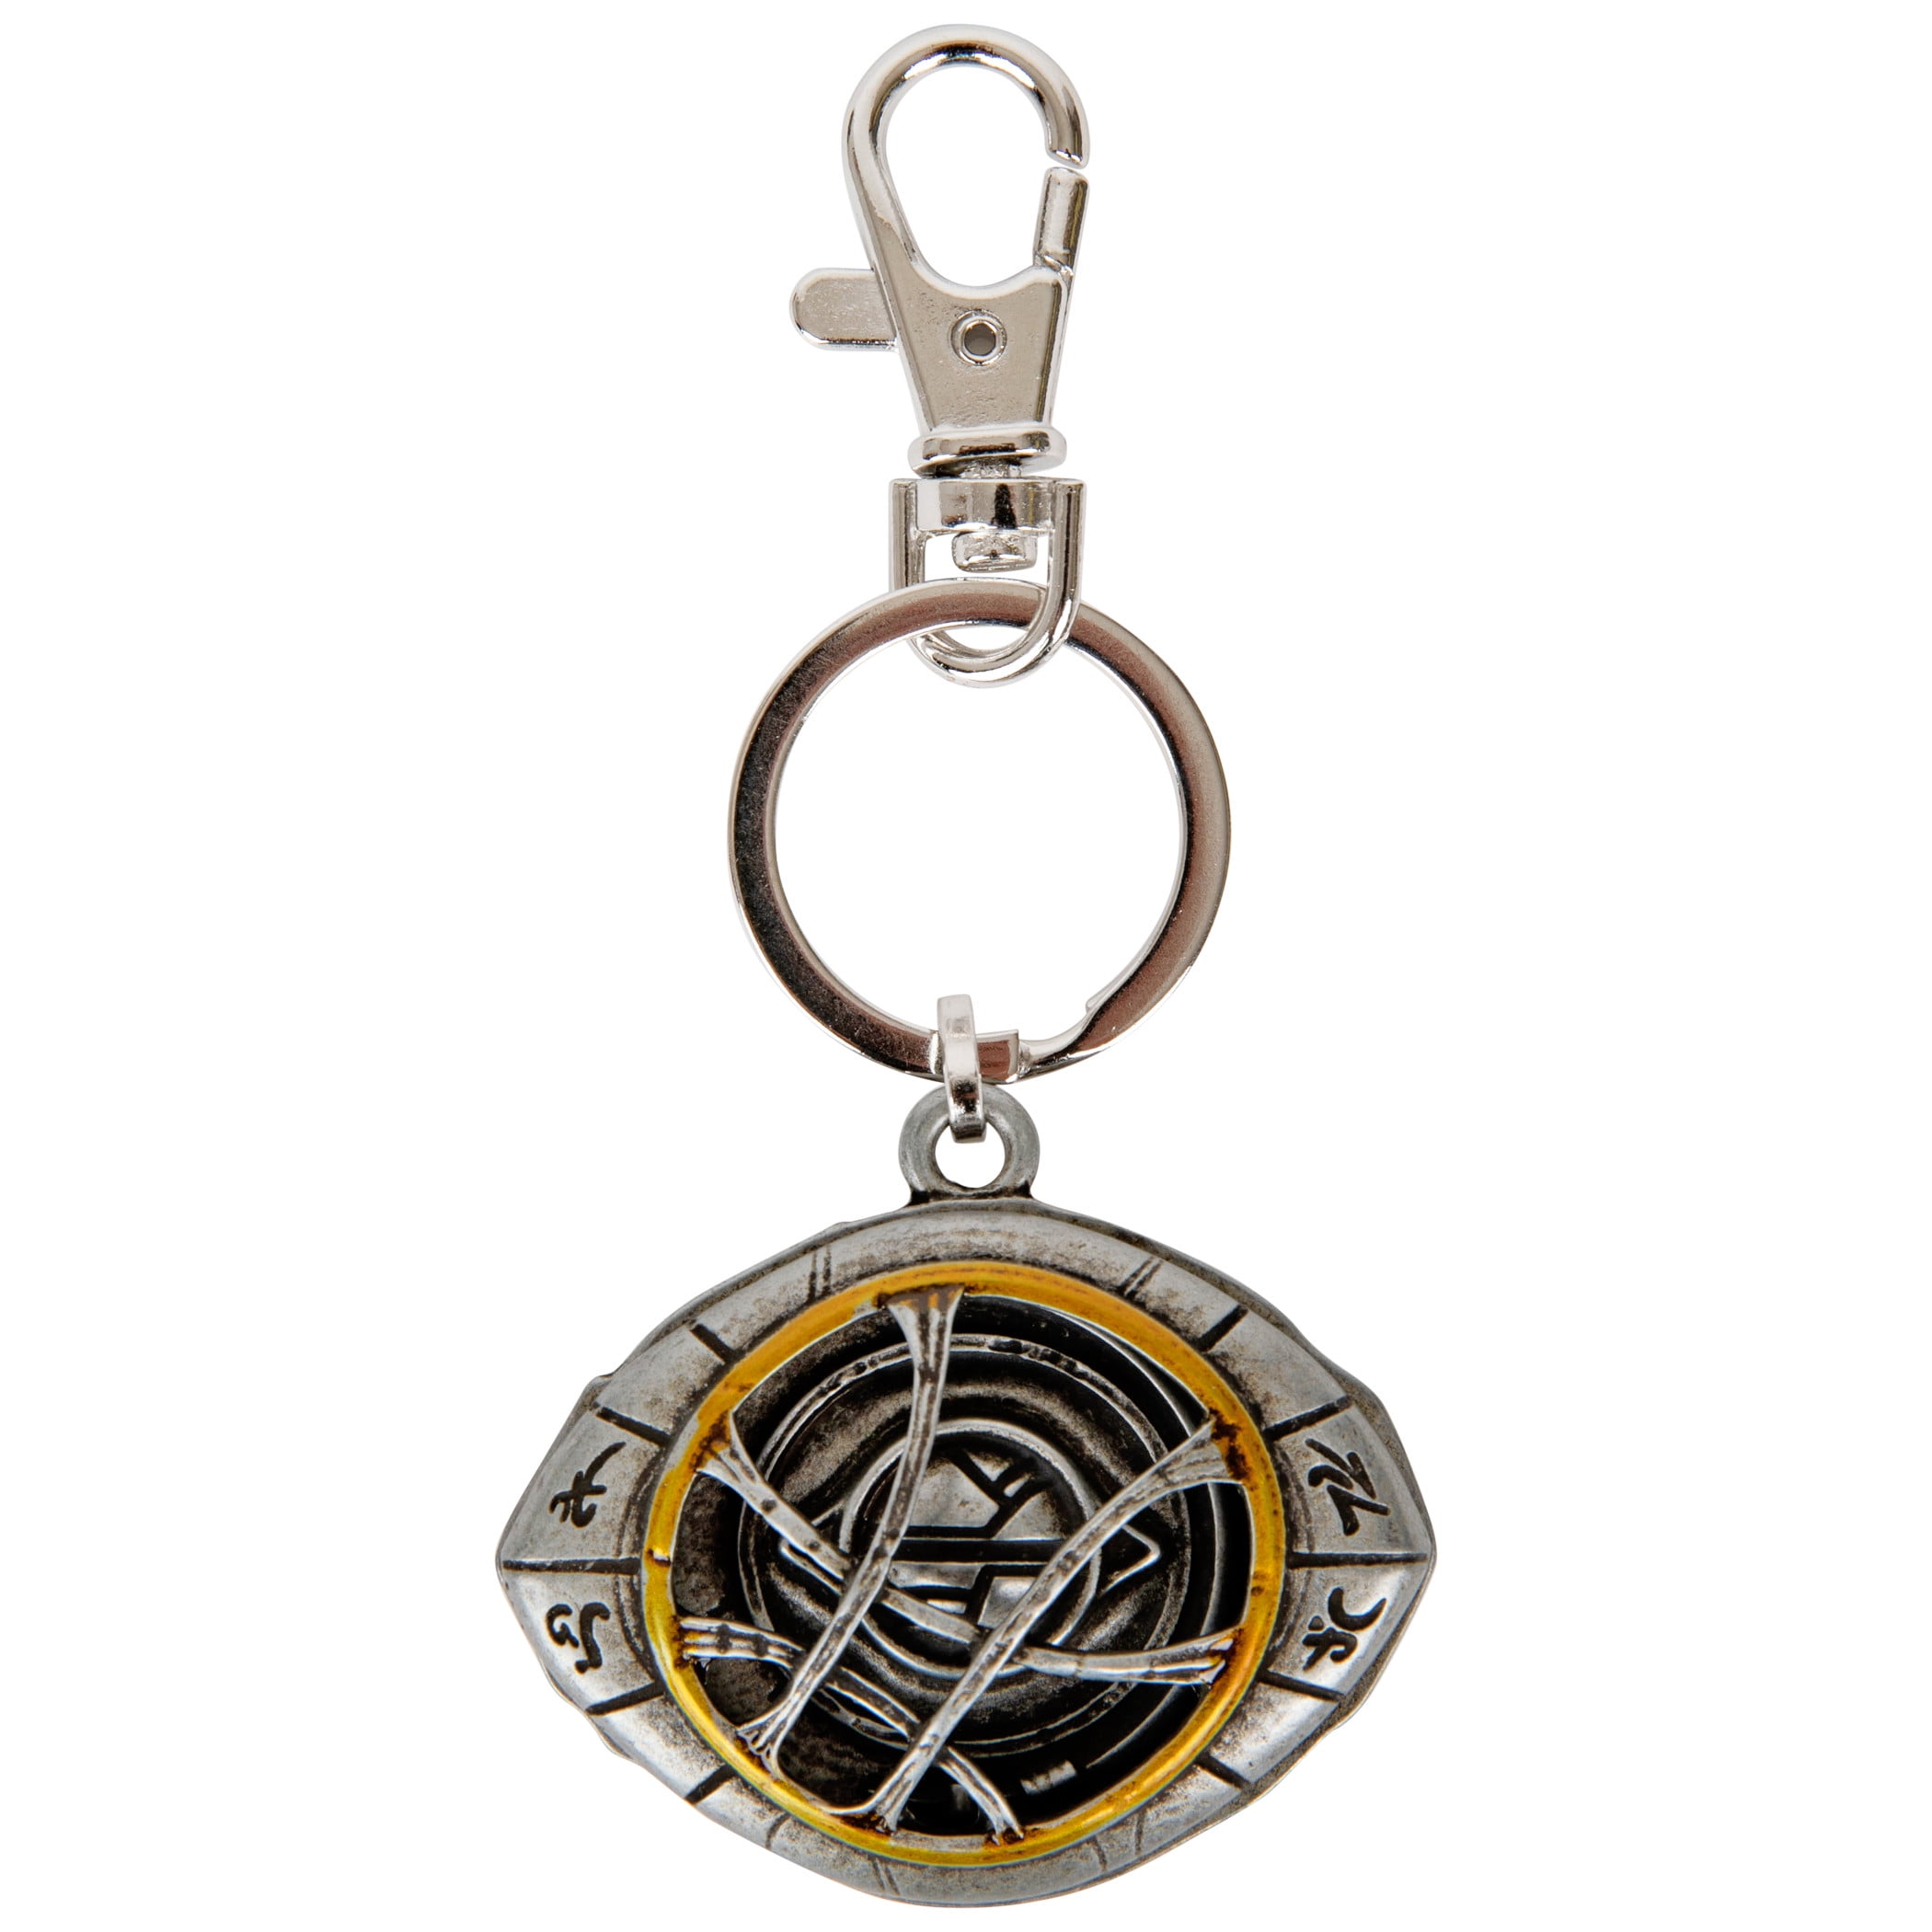 Marvel Doctor Strange Multiverse of Madness Eye of Agamotto 3D Metal Keychain be773546 25bb 4903 977e 4d5620448eba.8d0151efb7611a4acff775179a6d6e82